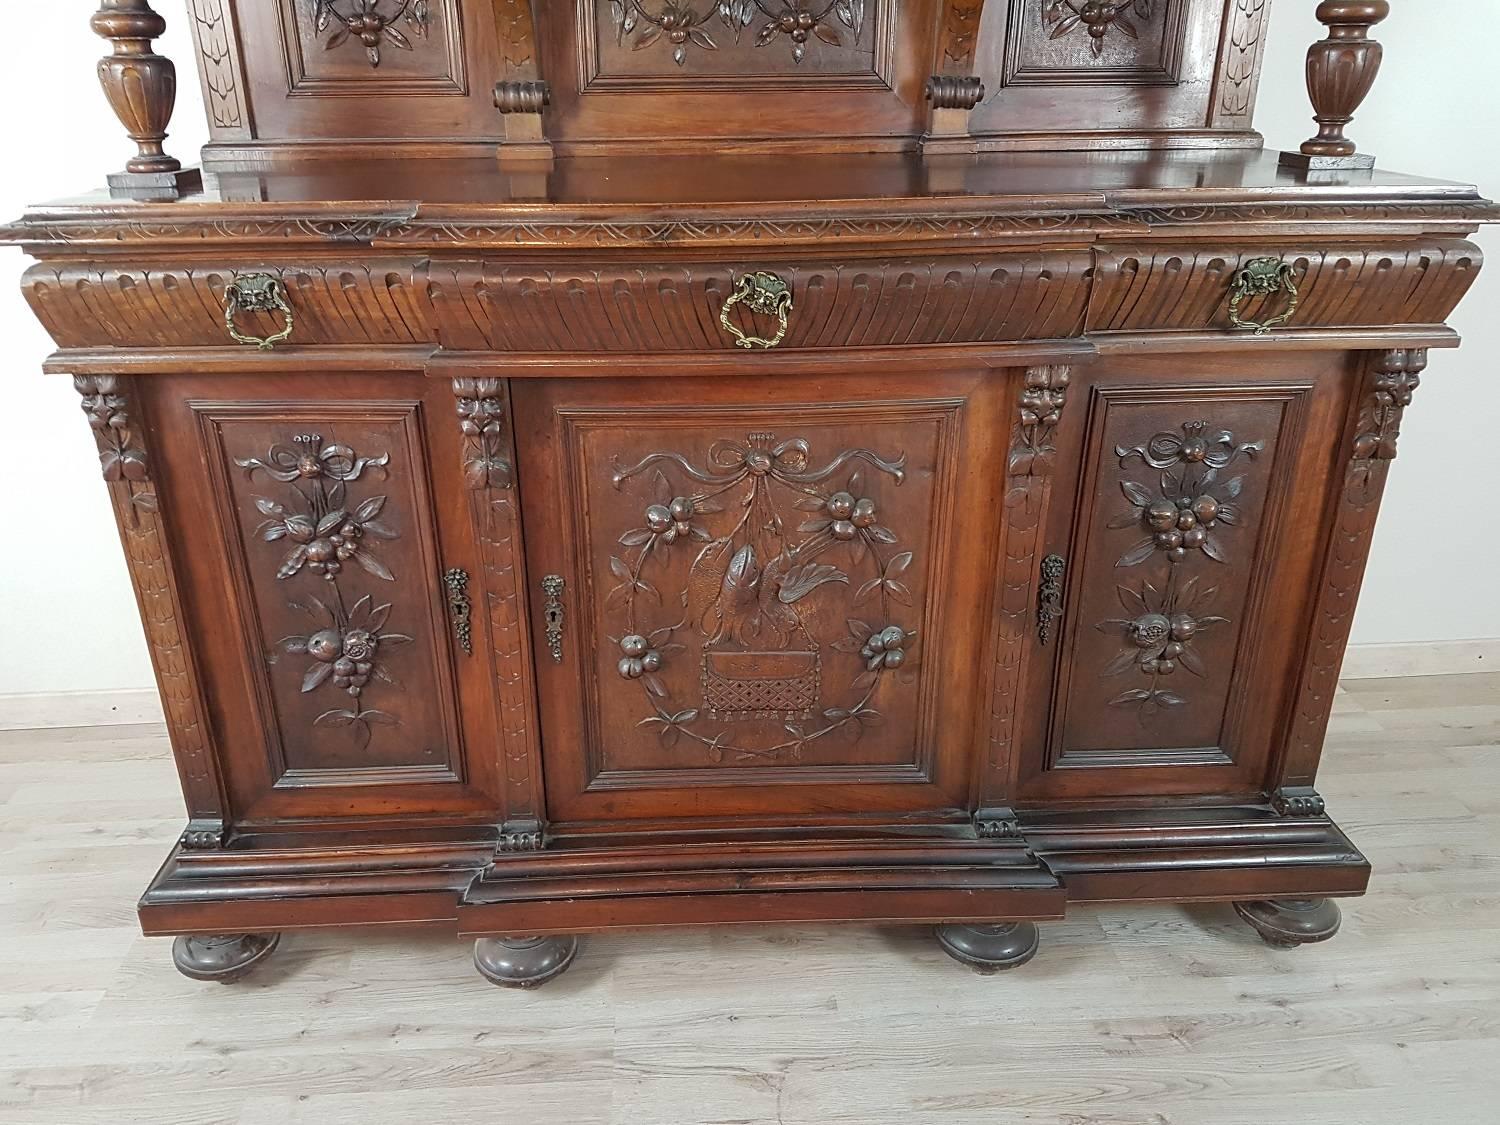 Beautiful monumental sideboard carved cabinet buffet historical period late 19th century, 1880-1890 fine walnut worked in perfect neo-Renaissance style with typical mythological representations of the Renaissance period. The buffet is richly carved